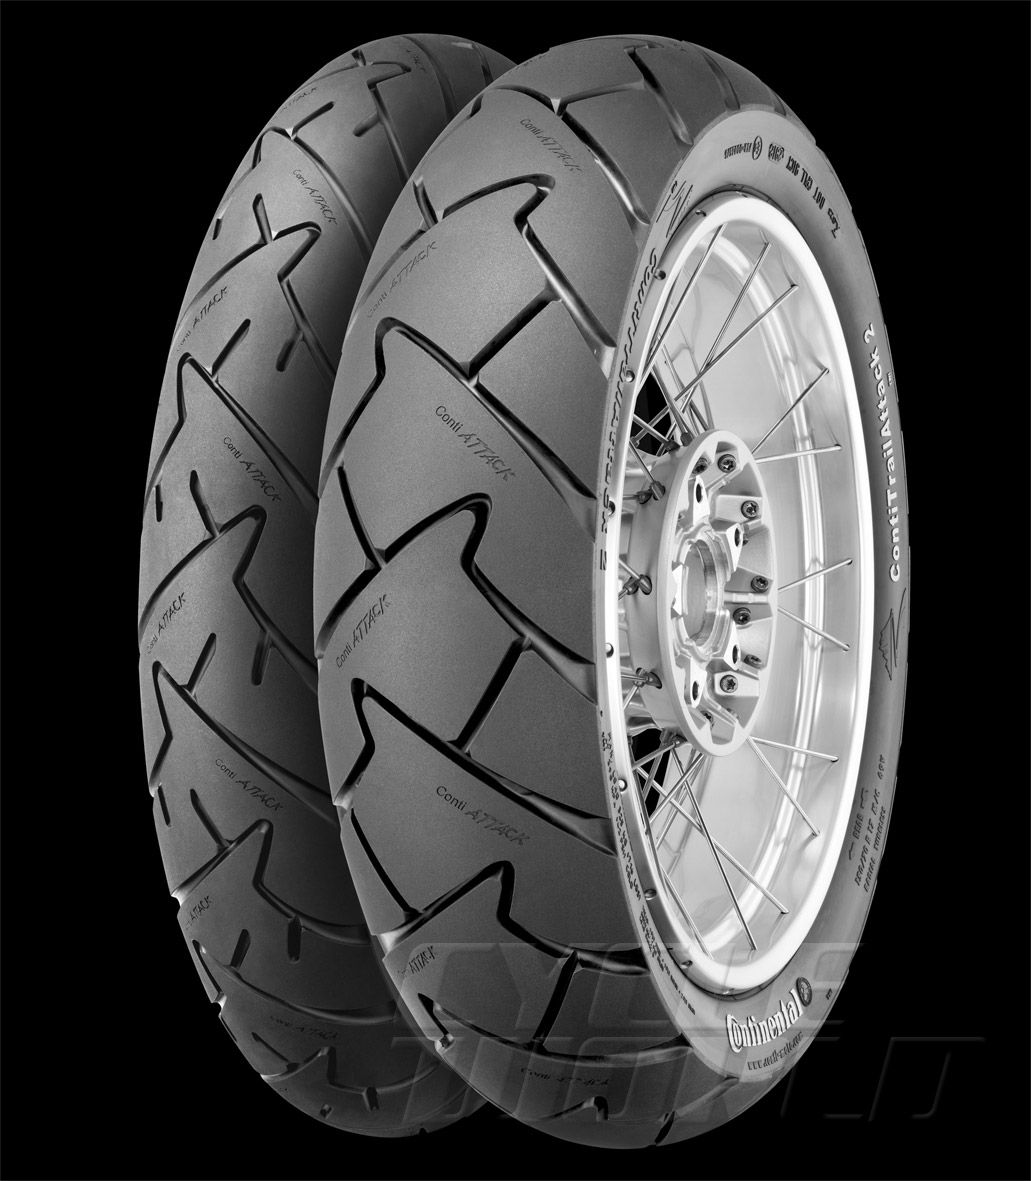 2 Tires 150/70 17 Continental Trail Attack 2 Front & Rear Tire Kit 110/80 19